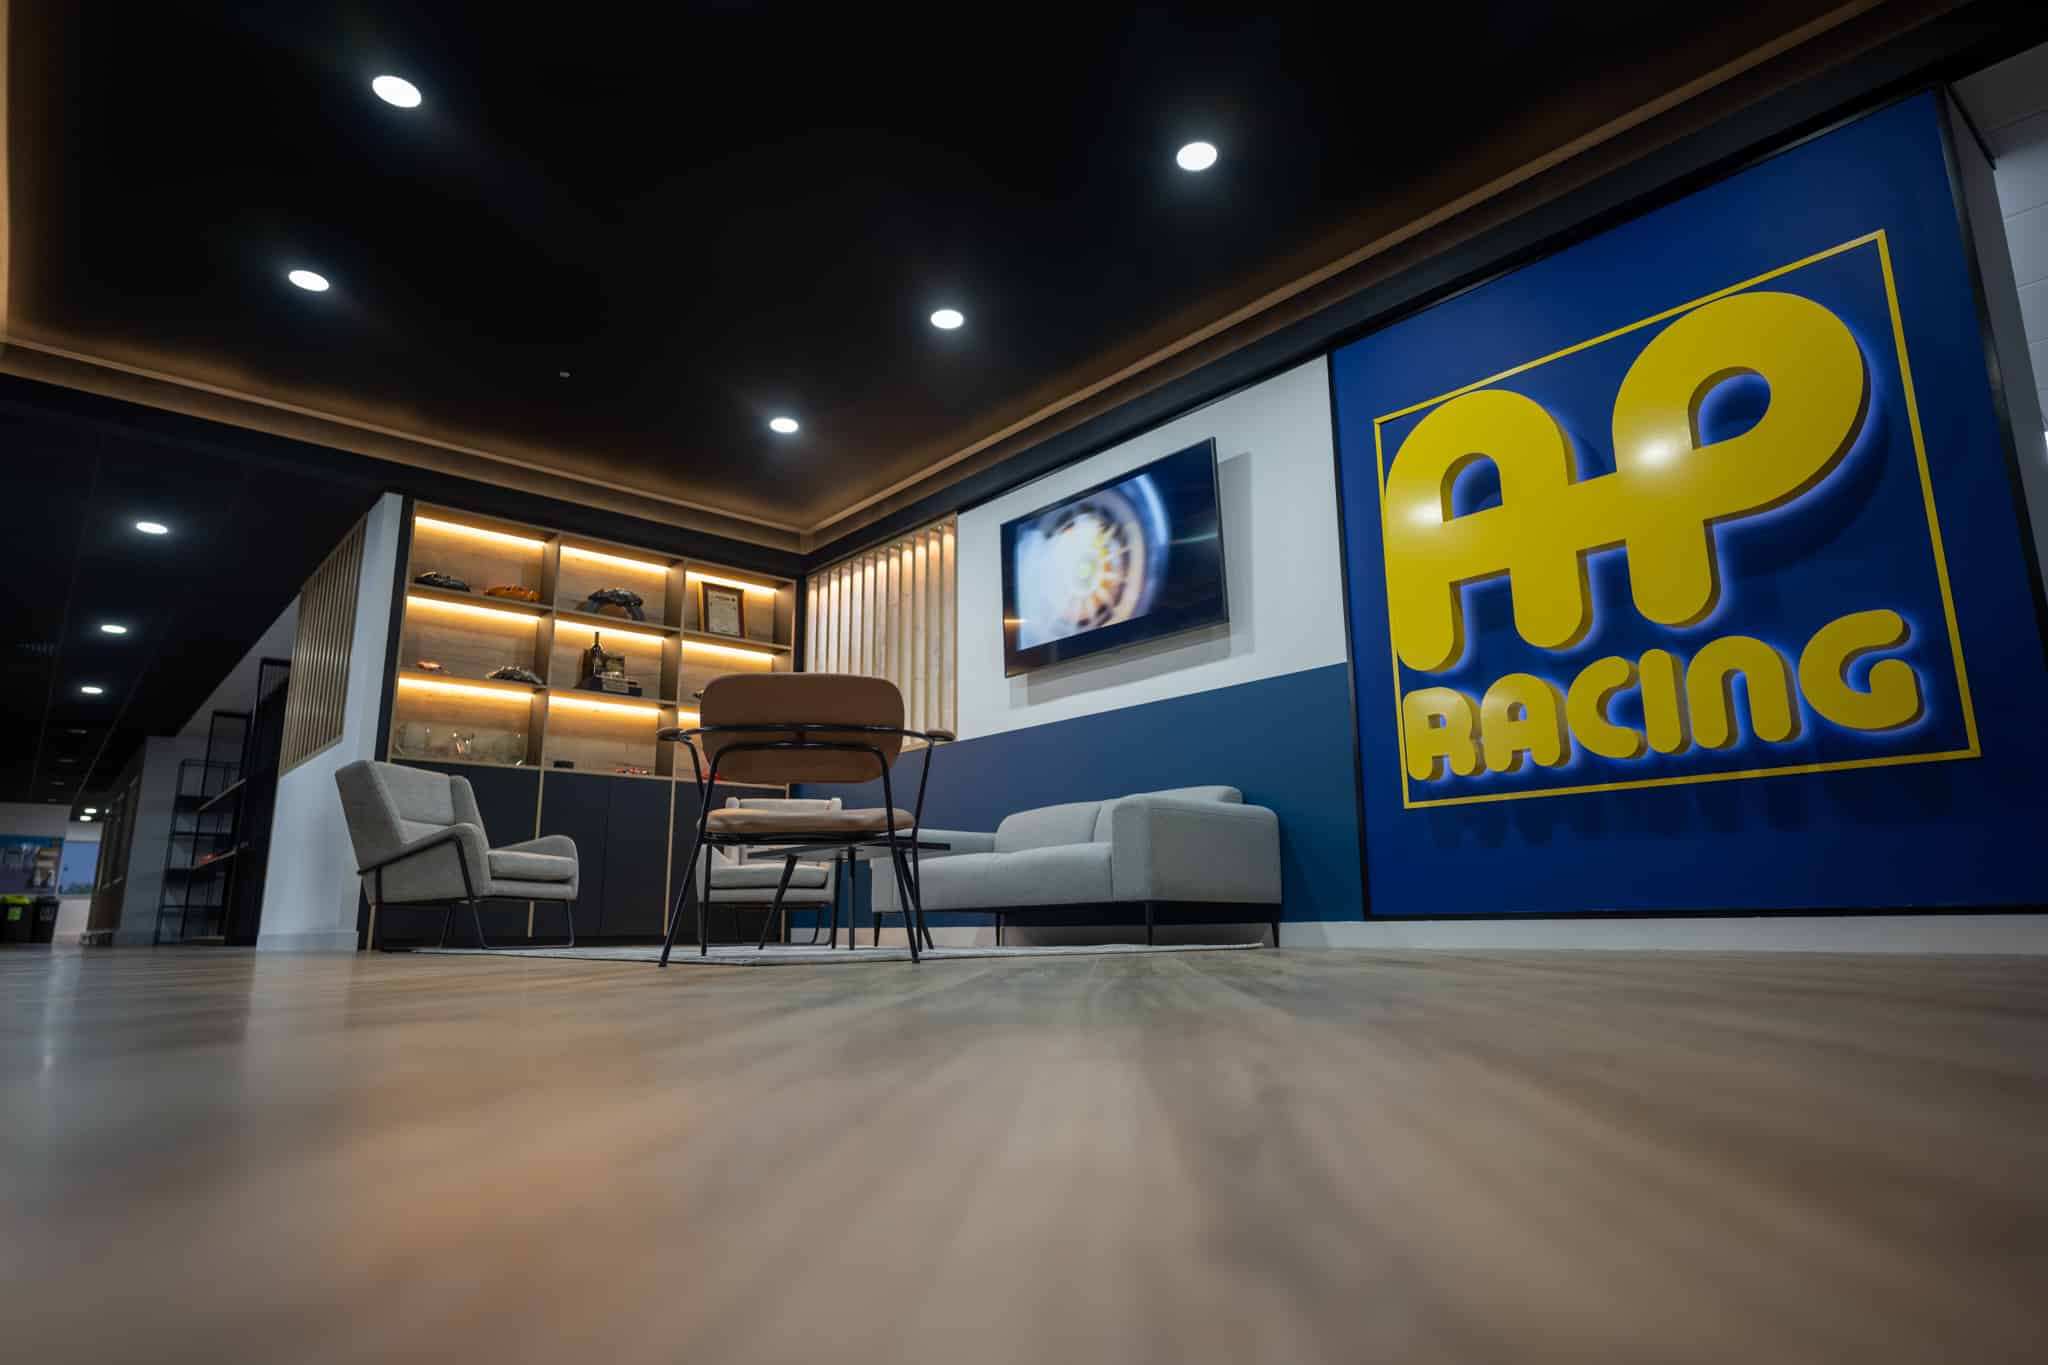 Demand has forced AP Racing to increase its workforce